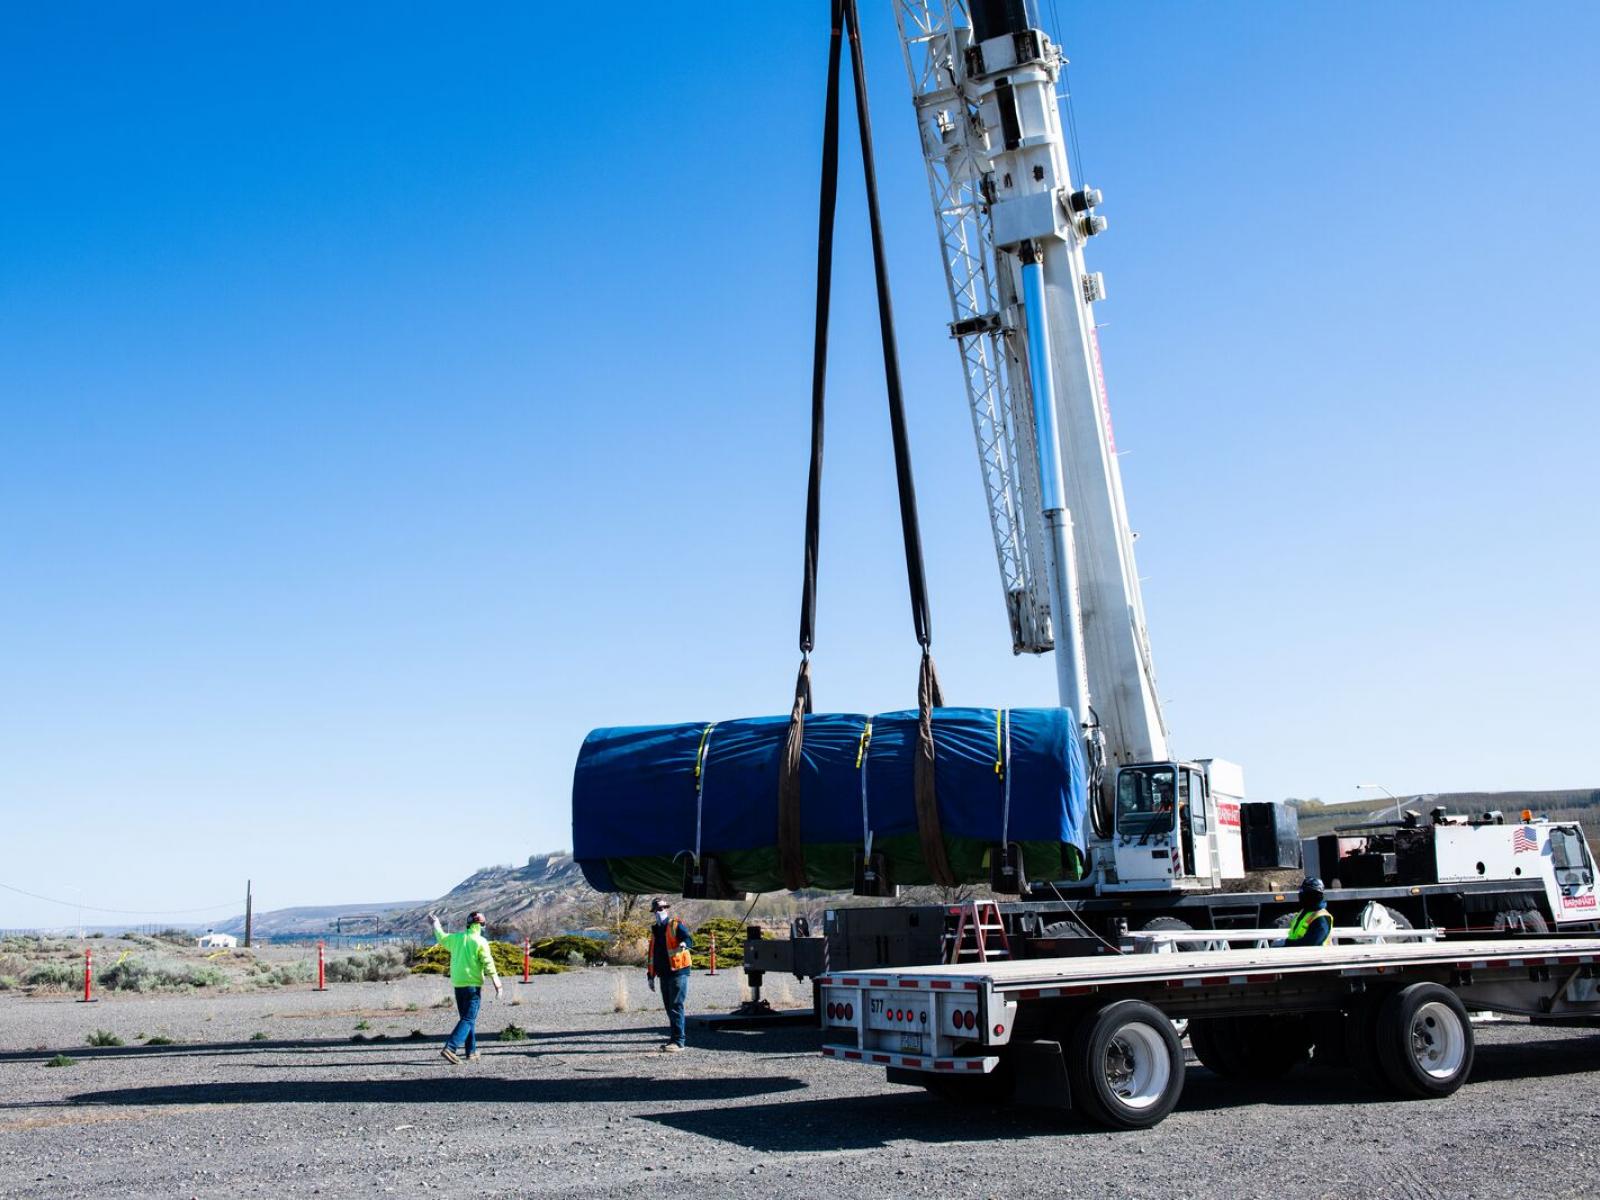 A crane lifts a spent fuel canister, wrapped in a blue tarp, from a flatbed truck.